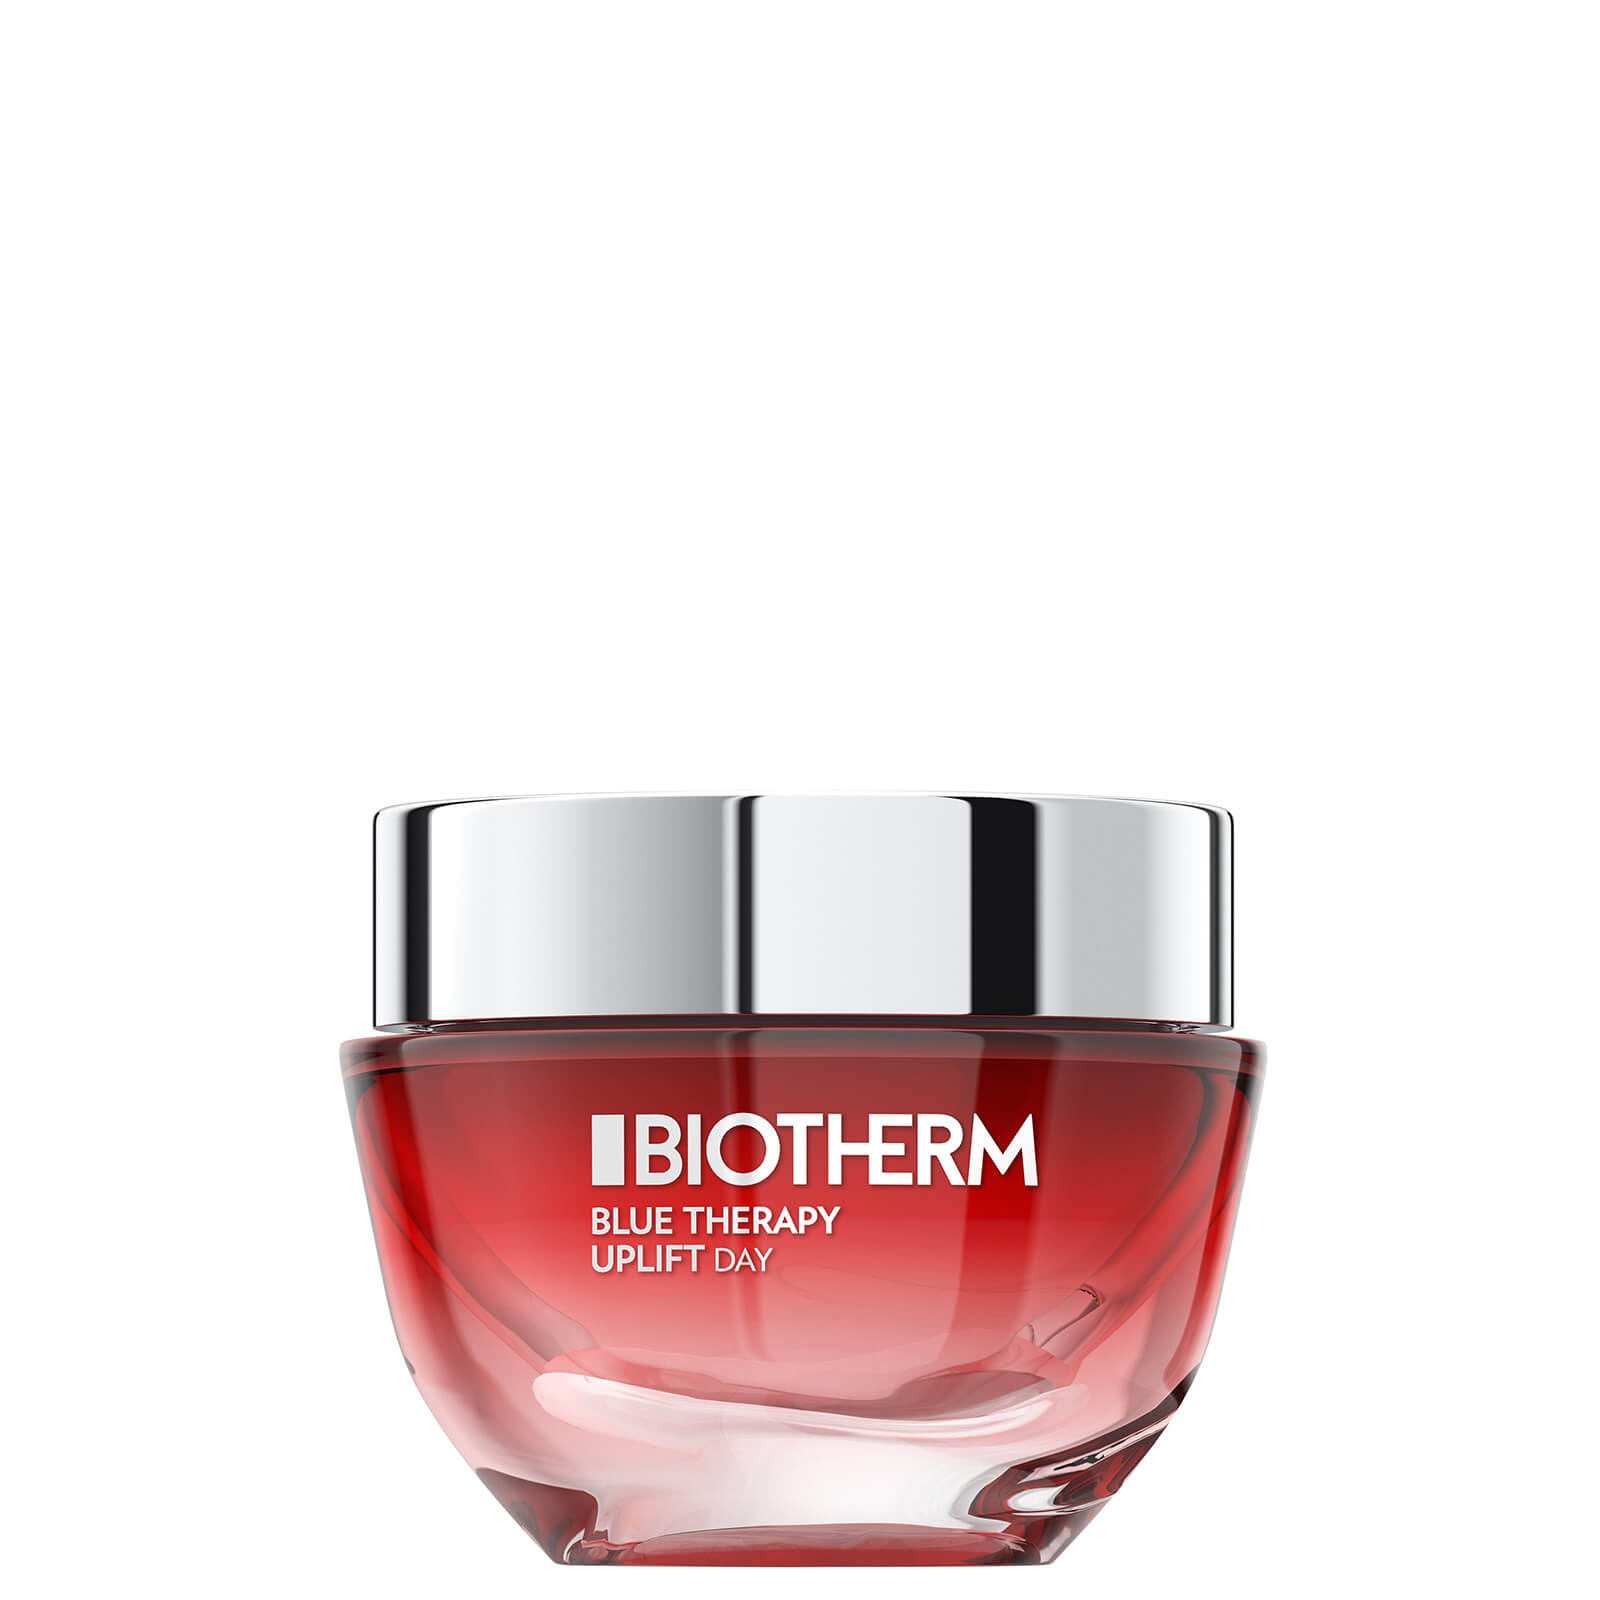 Photos - Cream / Lotion Biotherm Blue Therapy Red Algae Uplift Day Cream 50ml L7530203 